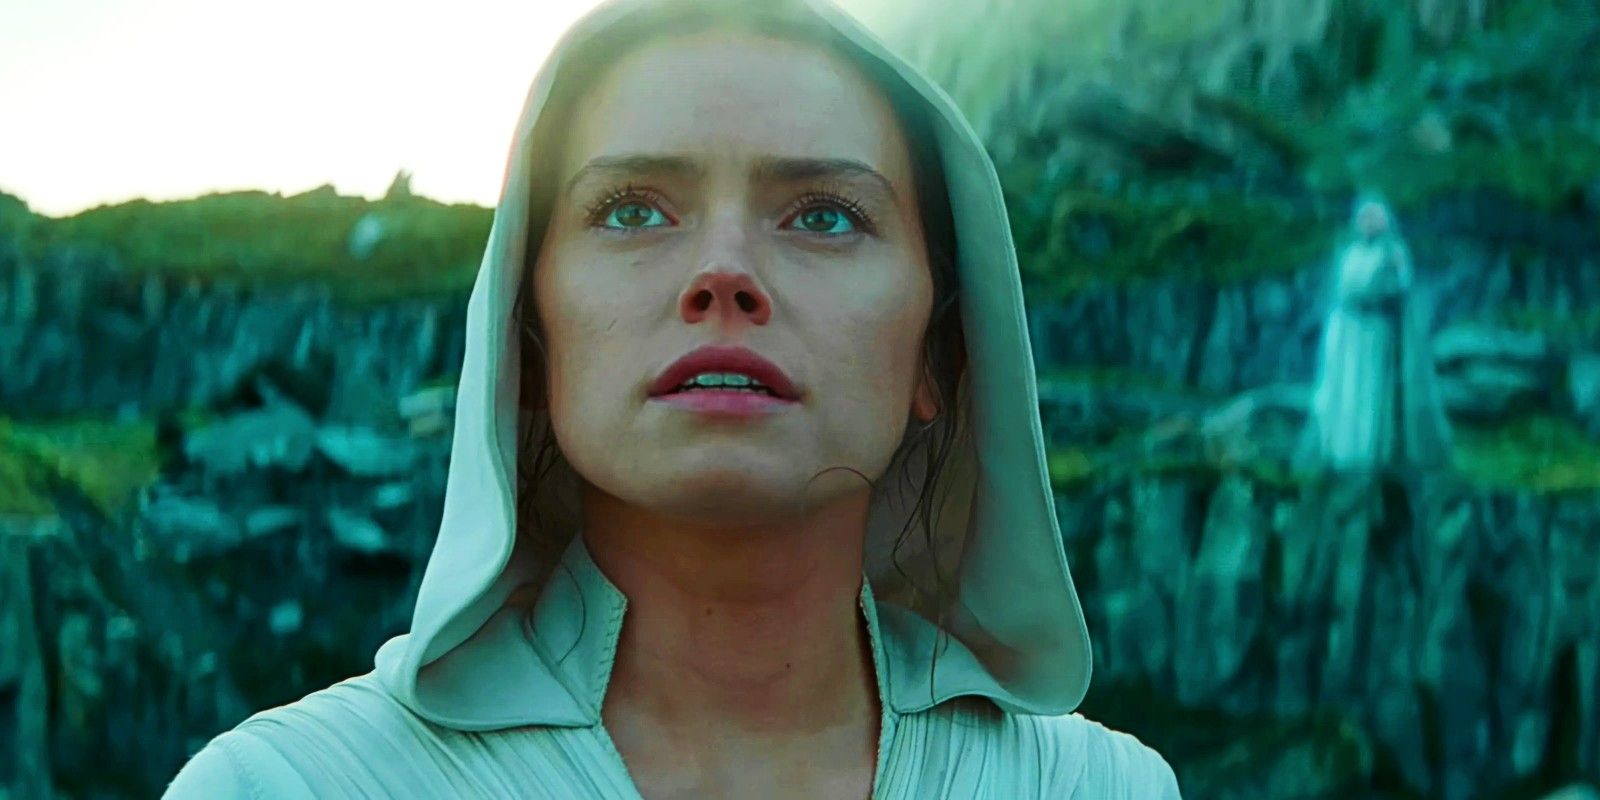 Daisy Ridley as Rey on Ahch-to in Star Wars The Rise of Skywalker